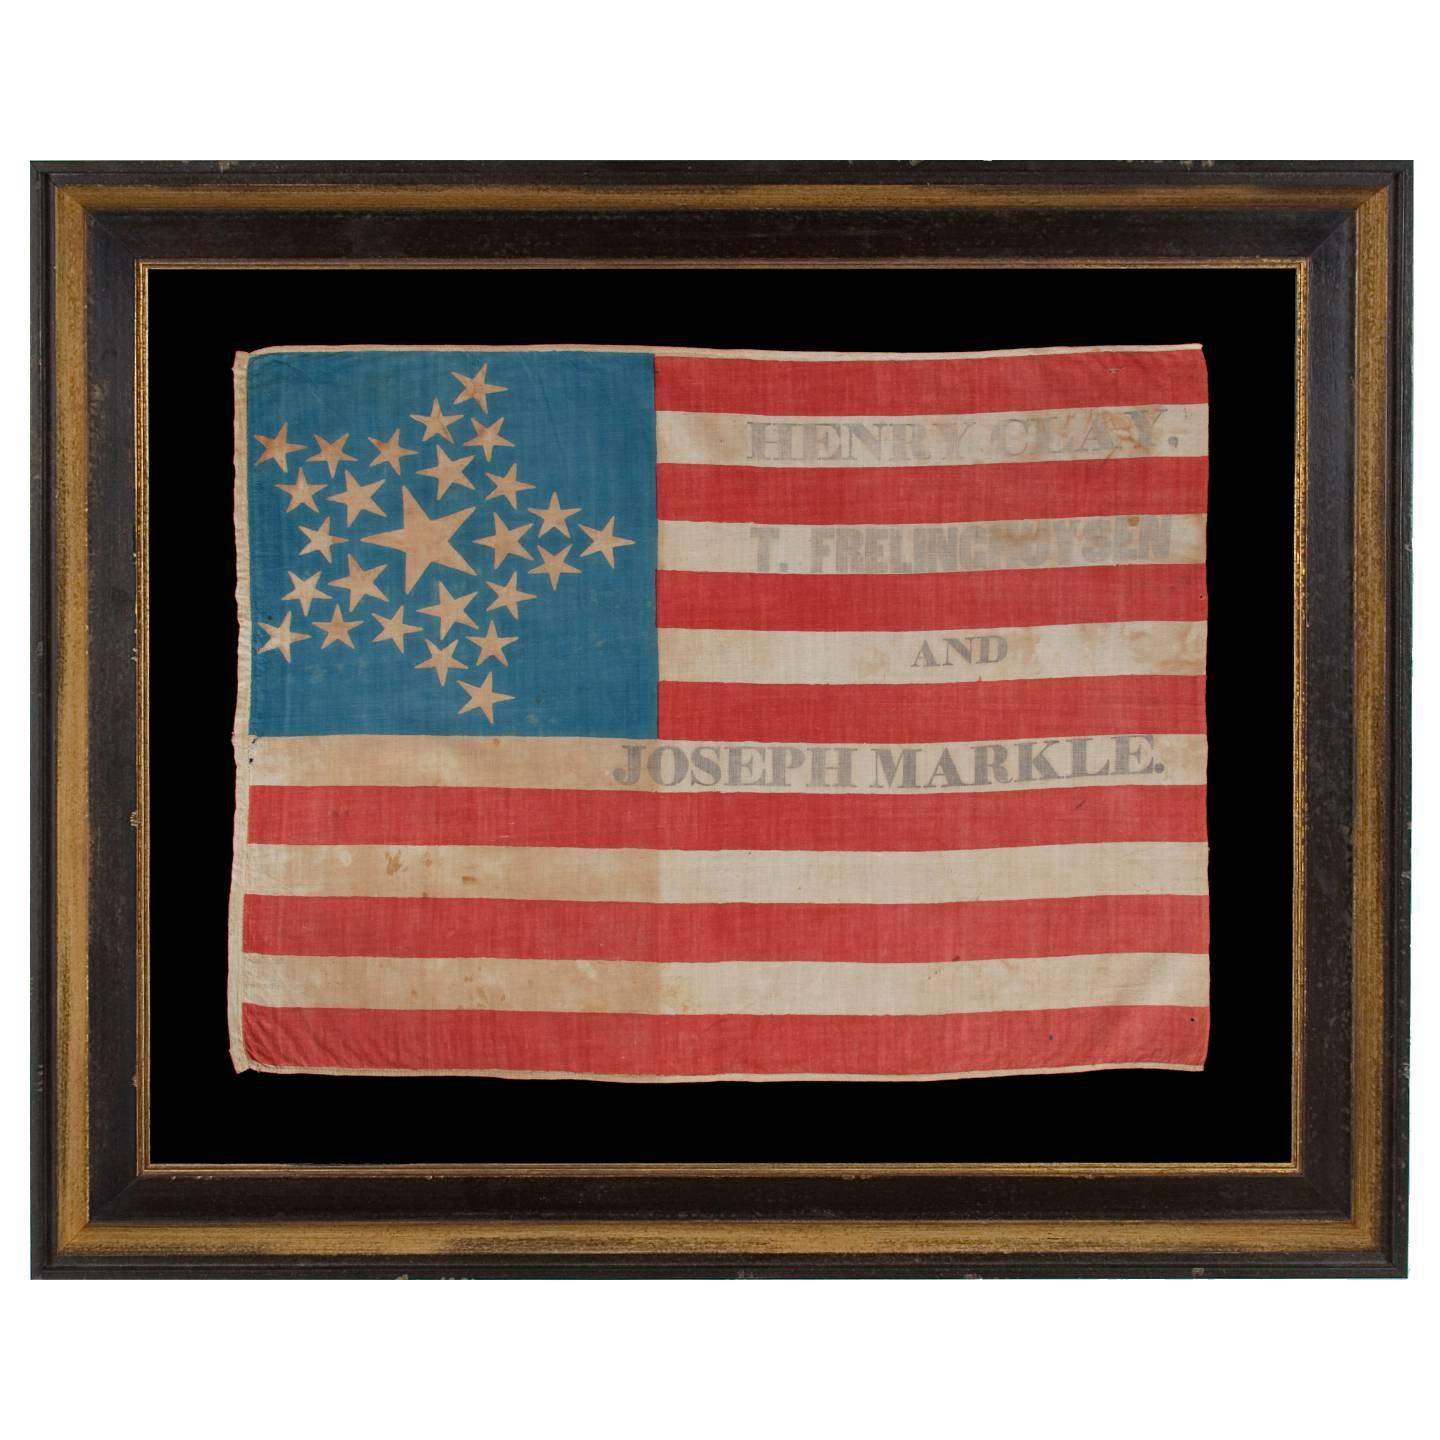 26 Star, 1844 Presidential Campaign Flag for Clay, Frelinghuysen and Markle